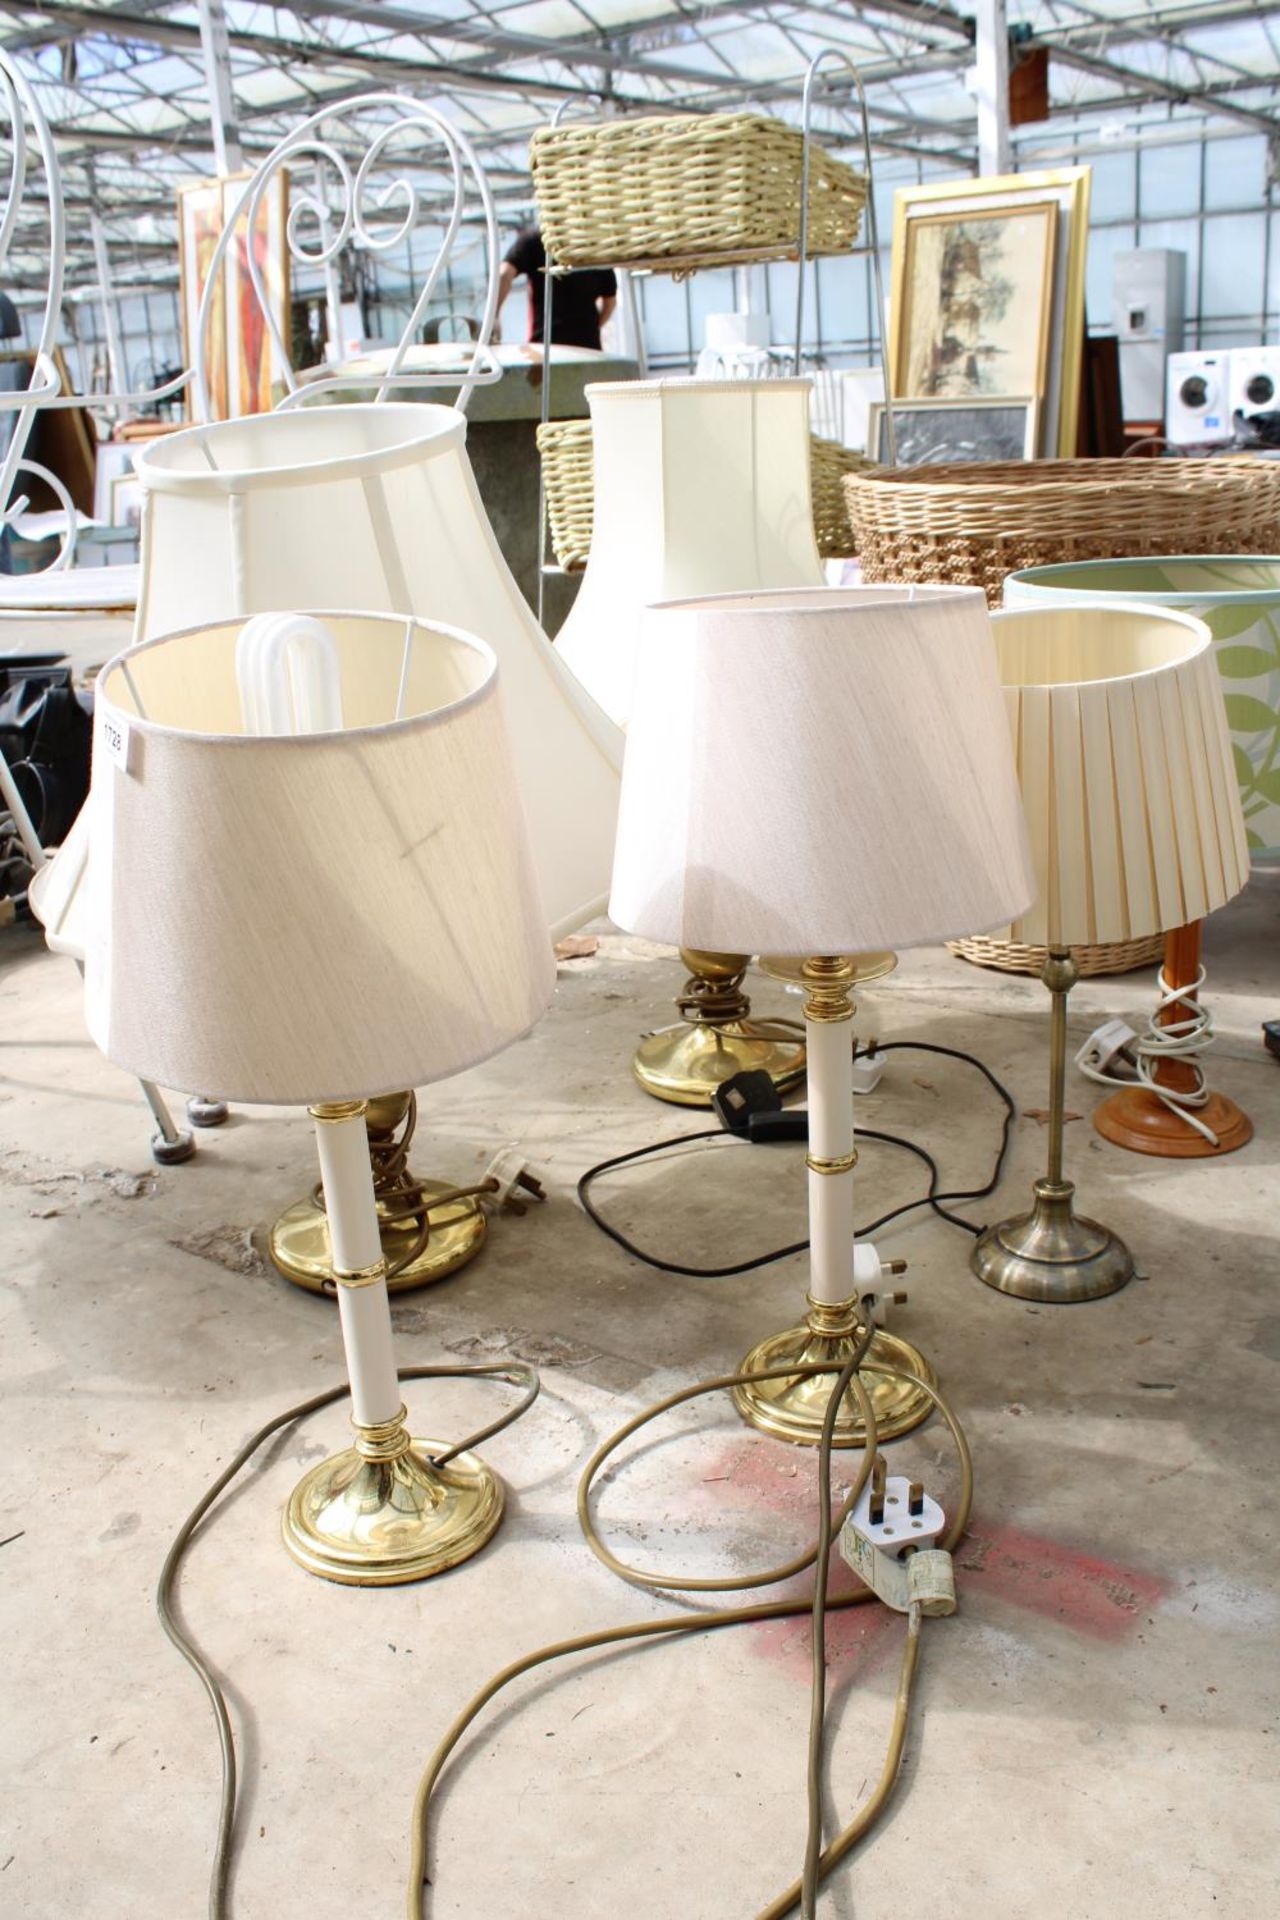 SIX VARIOUS TABLE LAMPS WITH SHADES - Image 2 of 3